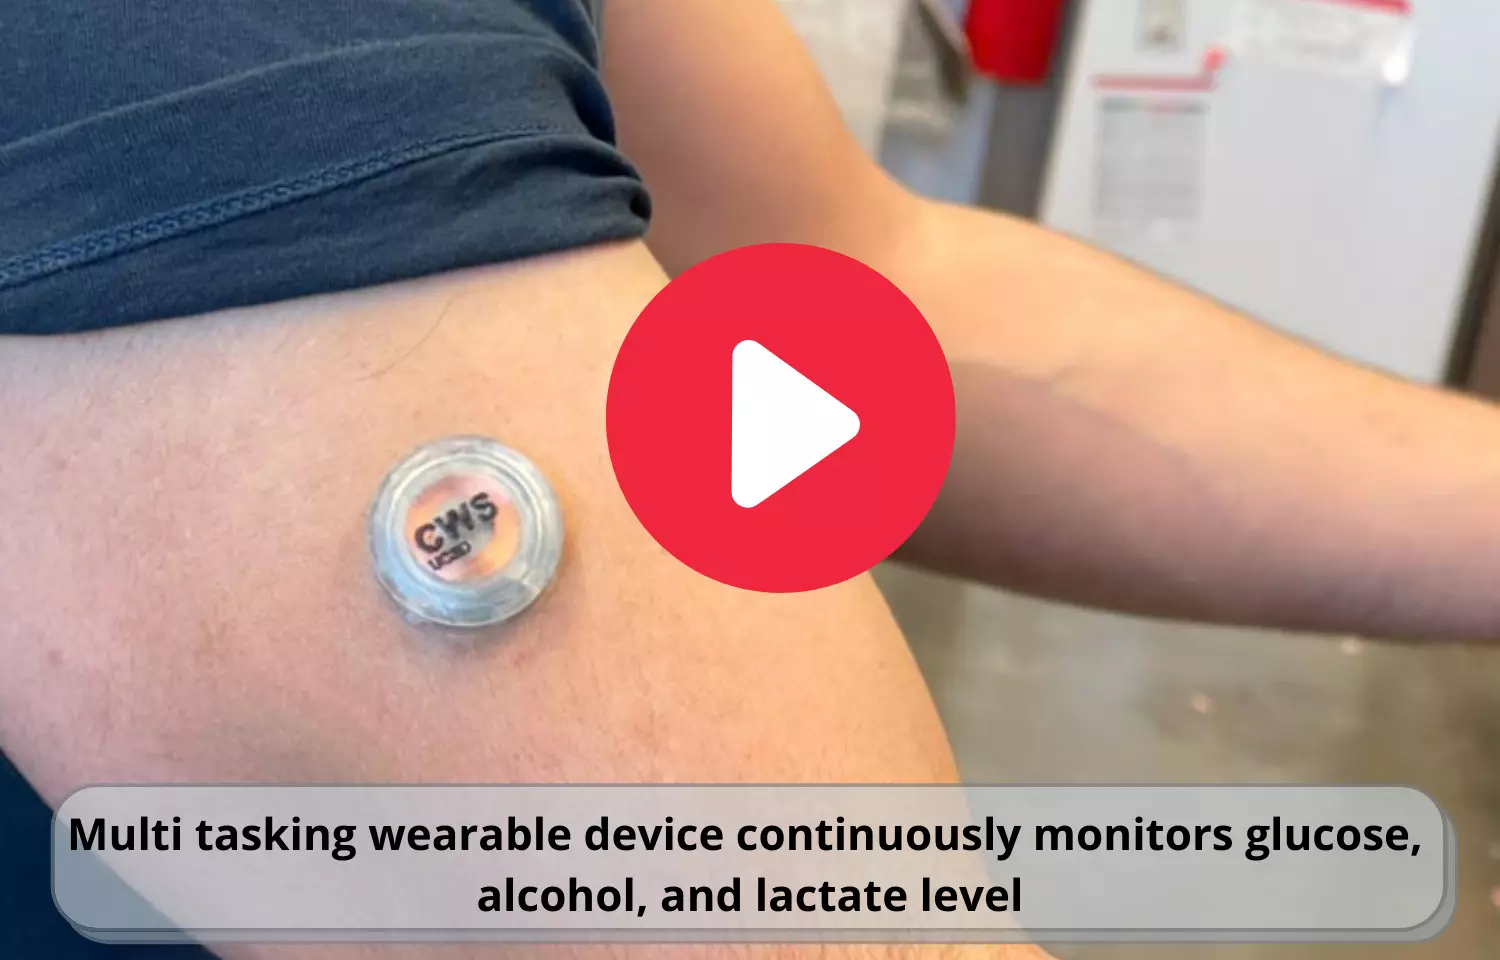 Multi tasking wearable device to monitor glucose, alcohol, and lactate level